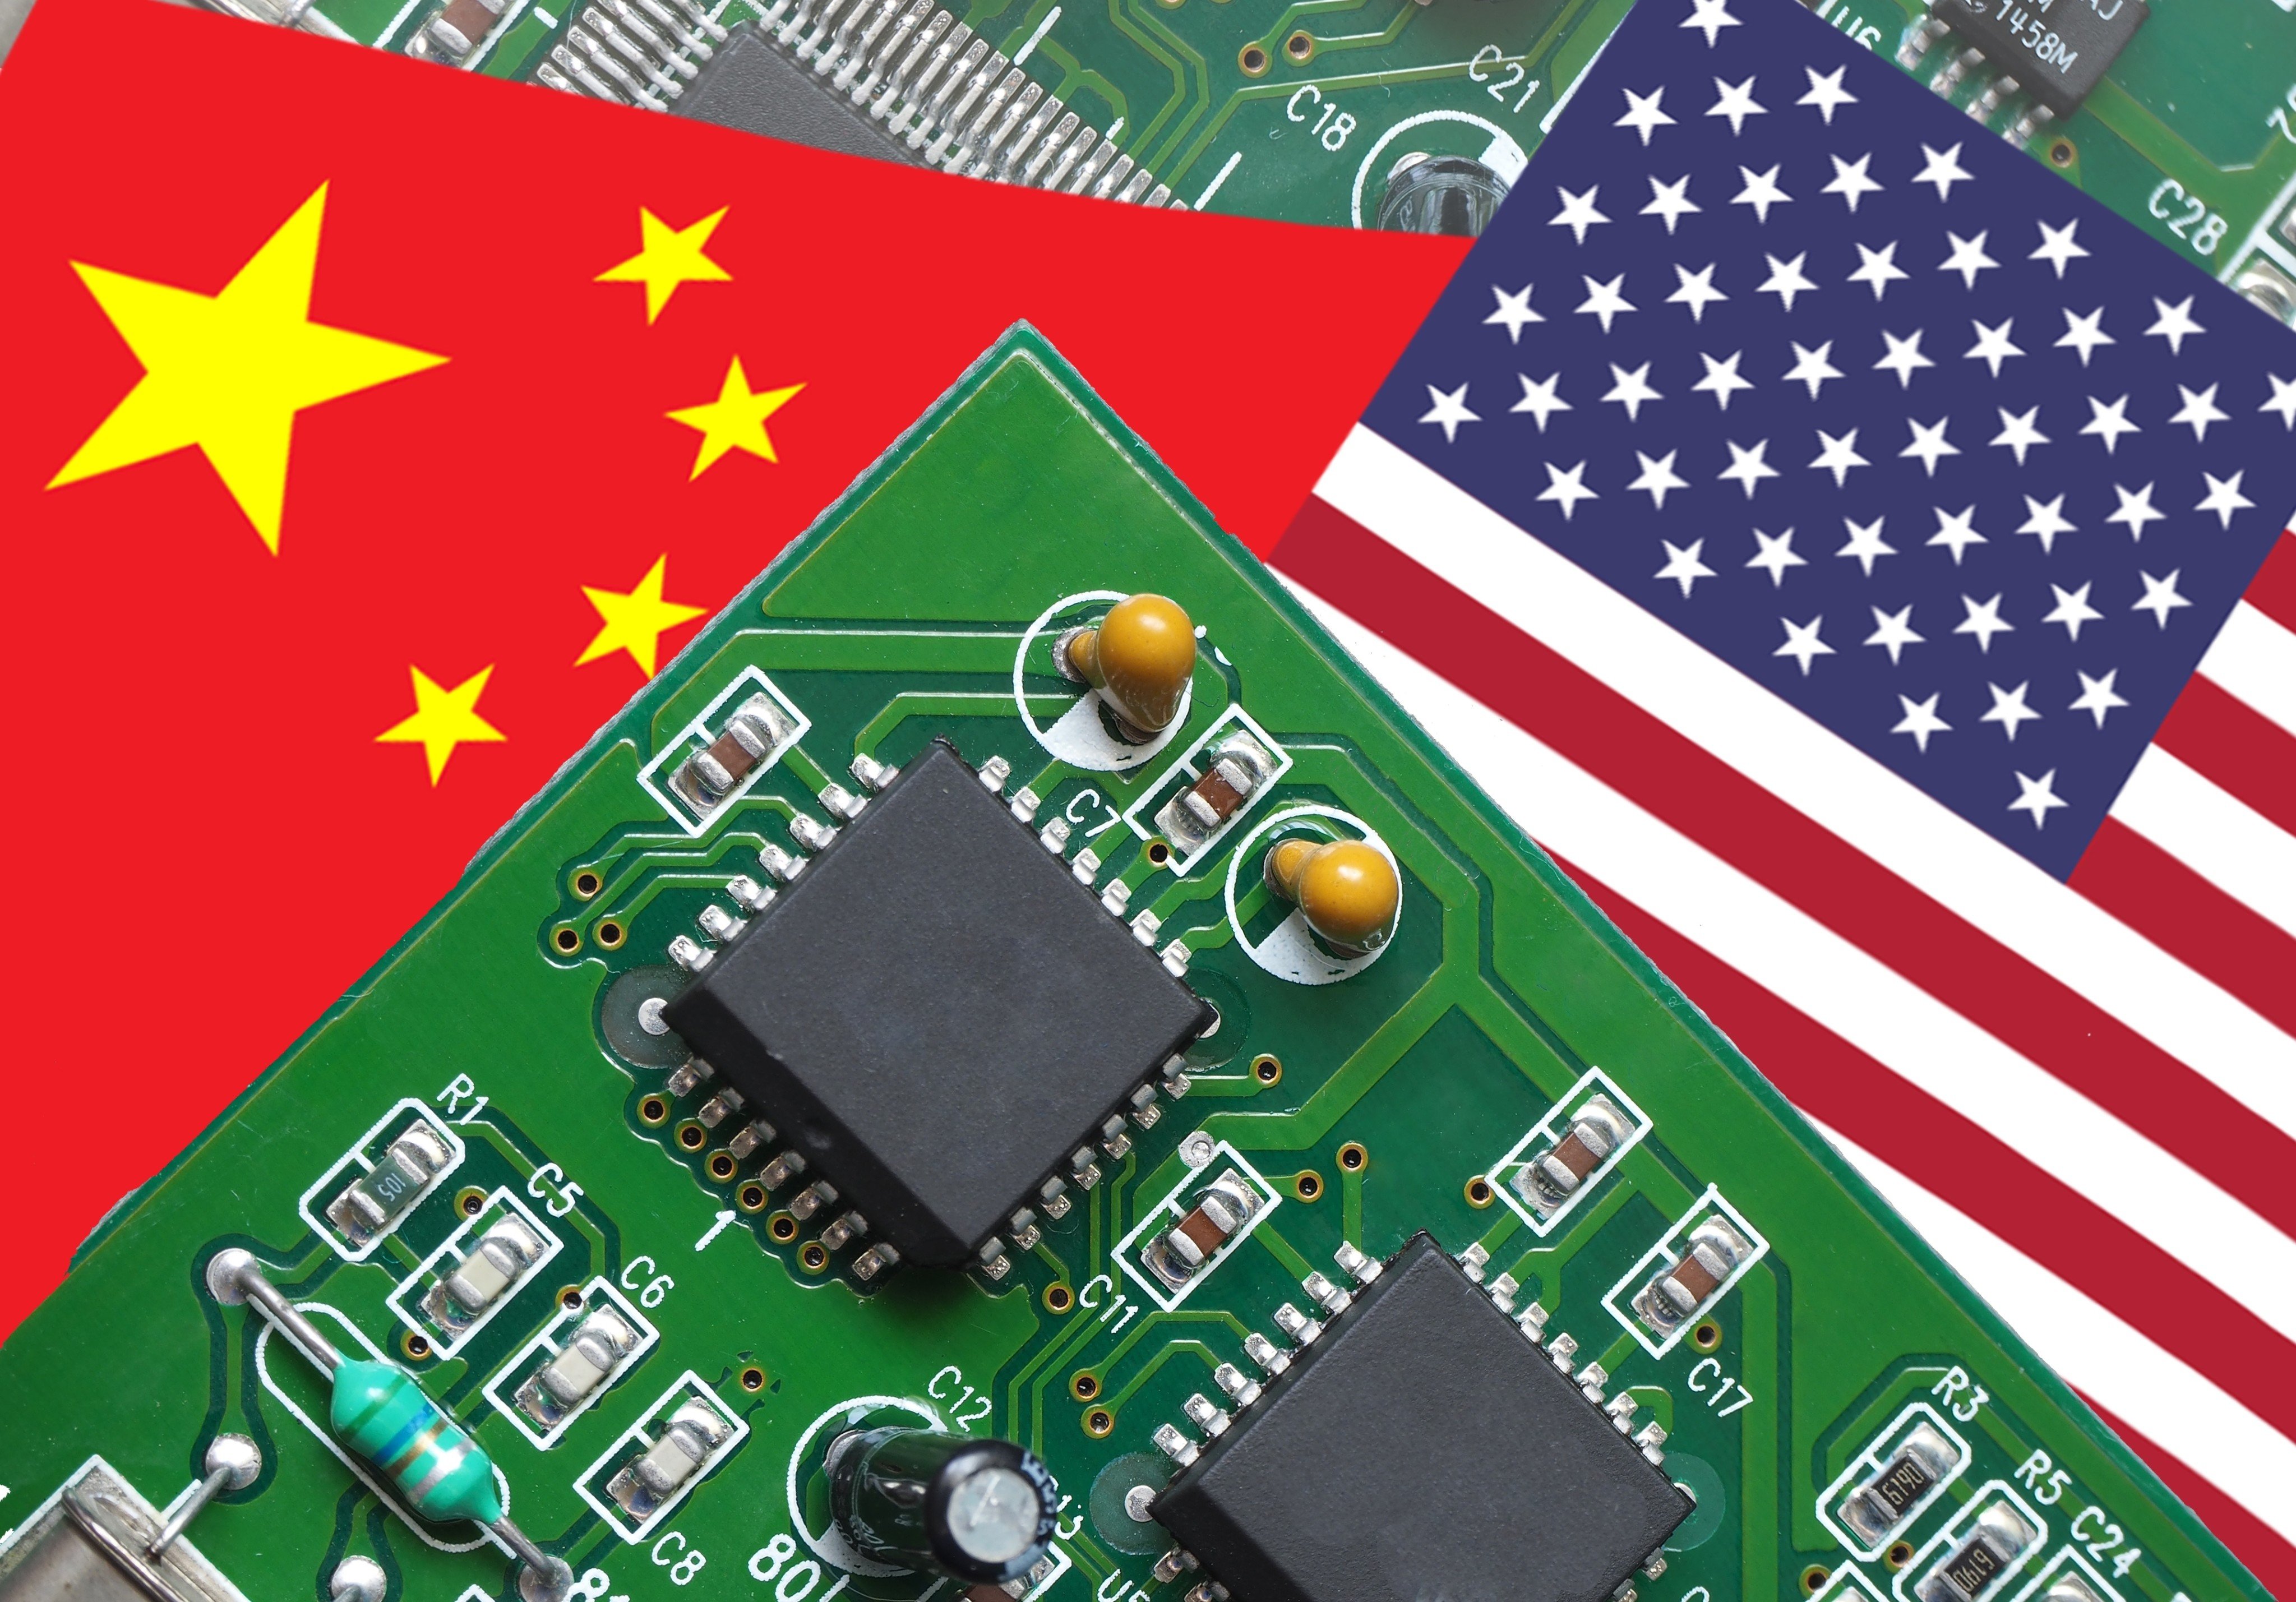 The US Congress held a hearing on Tuesday exploring legislation to further limit US investment in Chinese tech sectors. Image: Shutterstock